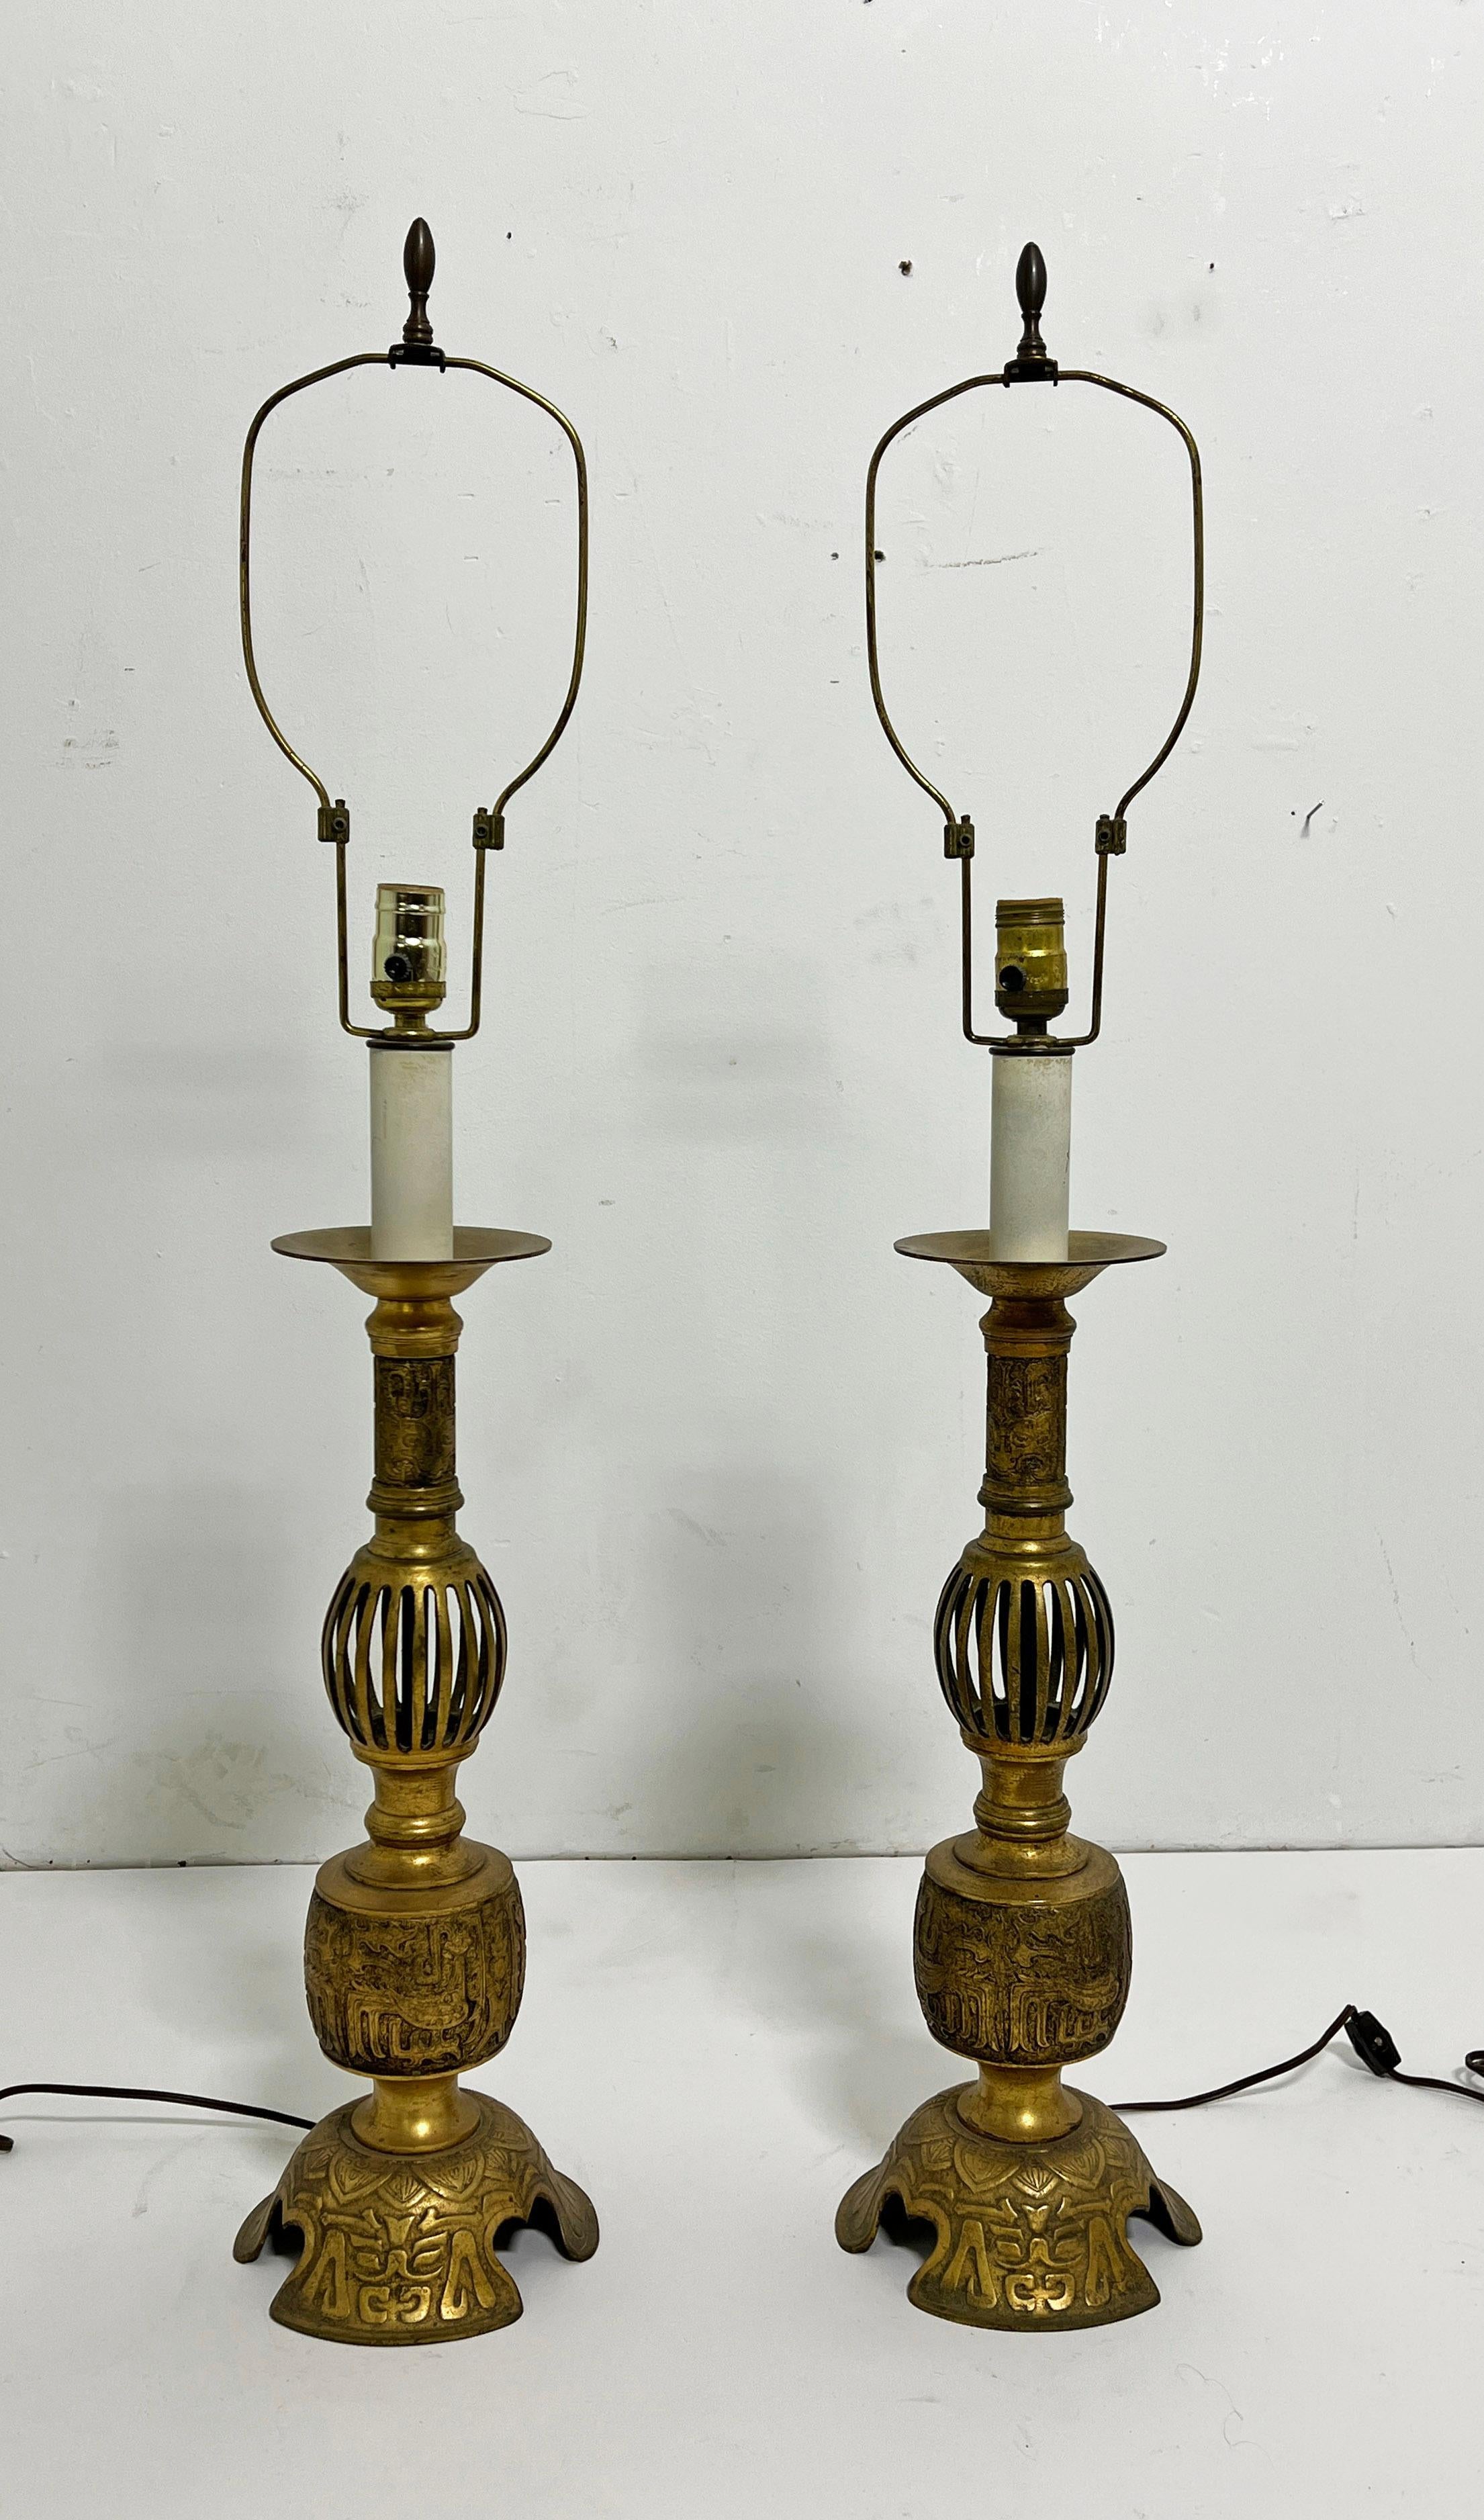 Pair of antique bronze work Chinese candlesticks converted to lamps, ca. late 1800s. 

38